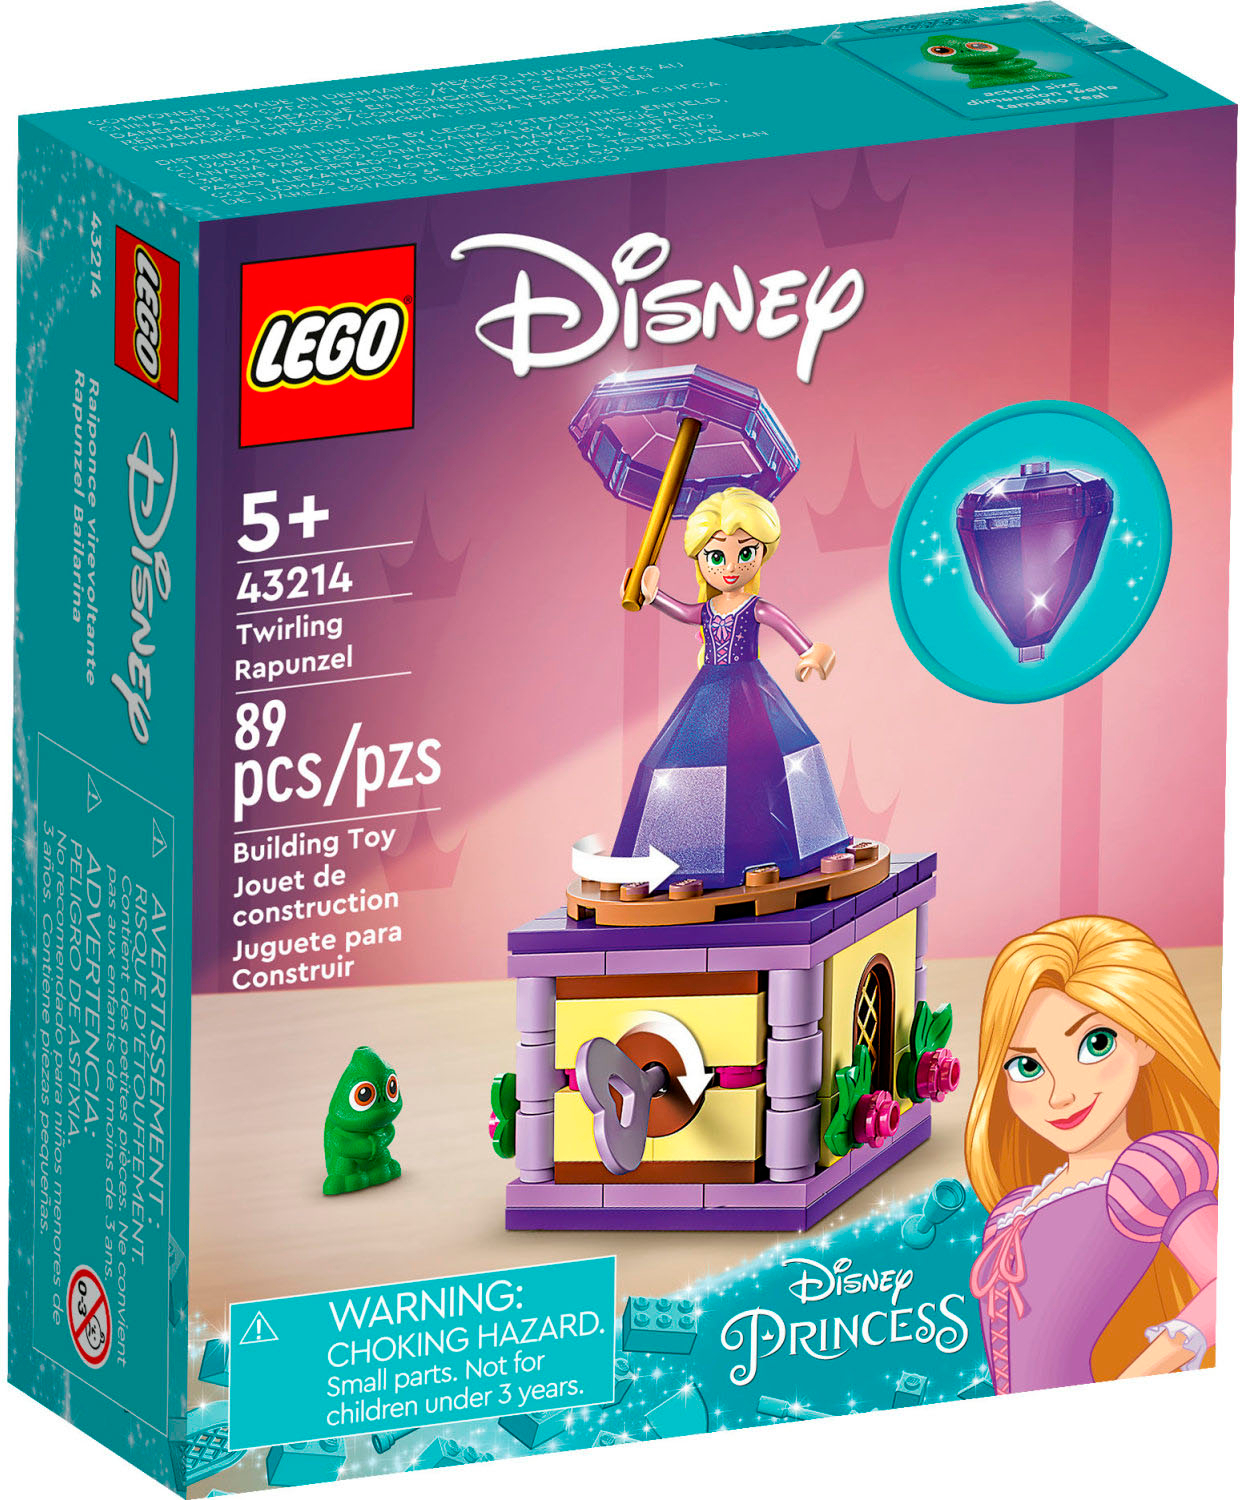 LEGO Disney Princess Twirling Rapunzel 43214 Building Toy with Diamond  Dress Mini-Doll and Pascal The Chameleon Figure, Wind Up Toy Rapunzel,  Disney